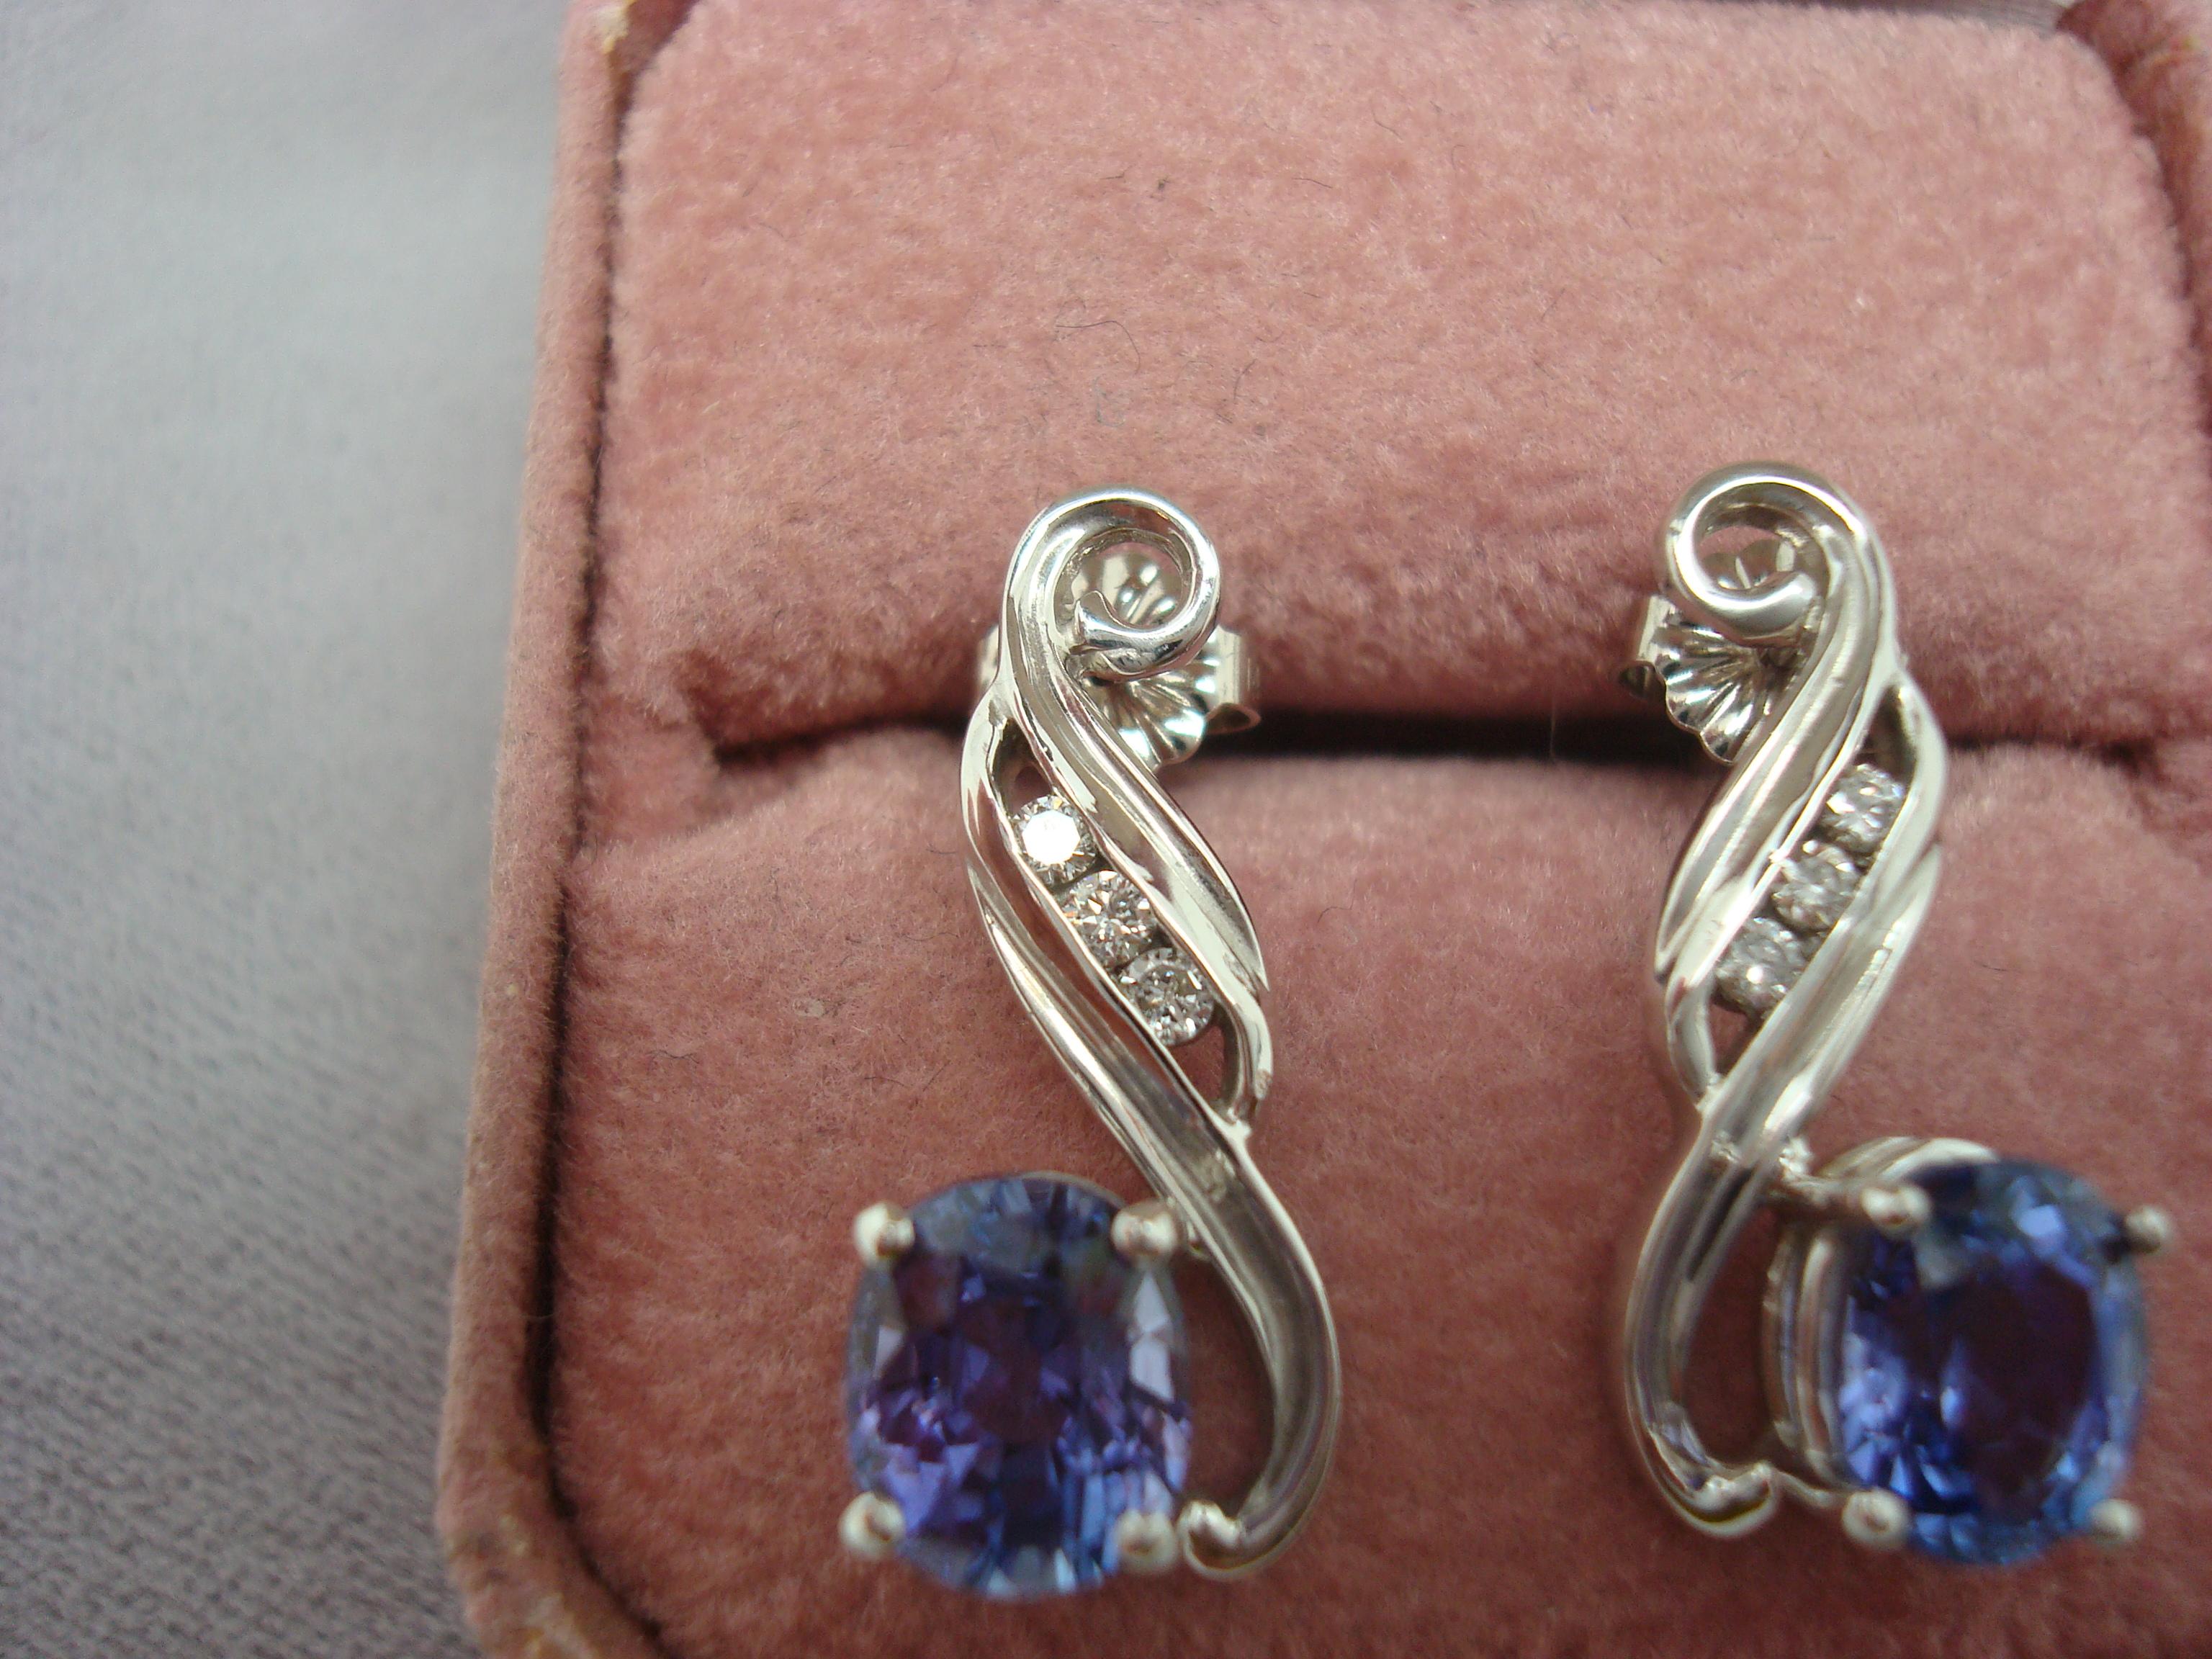 14k White Gold 3.2ct Genuine Natural Tanzanite and Diamond Earrings (#J1815)

14k white gold tanzanite and diamond drop earrings featuring a pair of oval cut tanzanites weighing 3.2 carats total, which is over 1 1/2 carats each! Both tanzanites